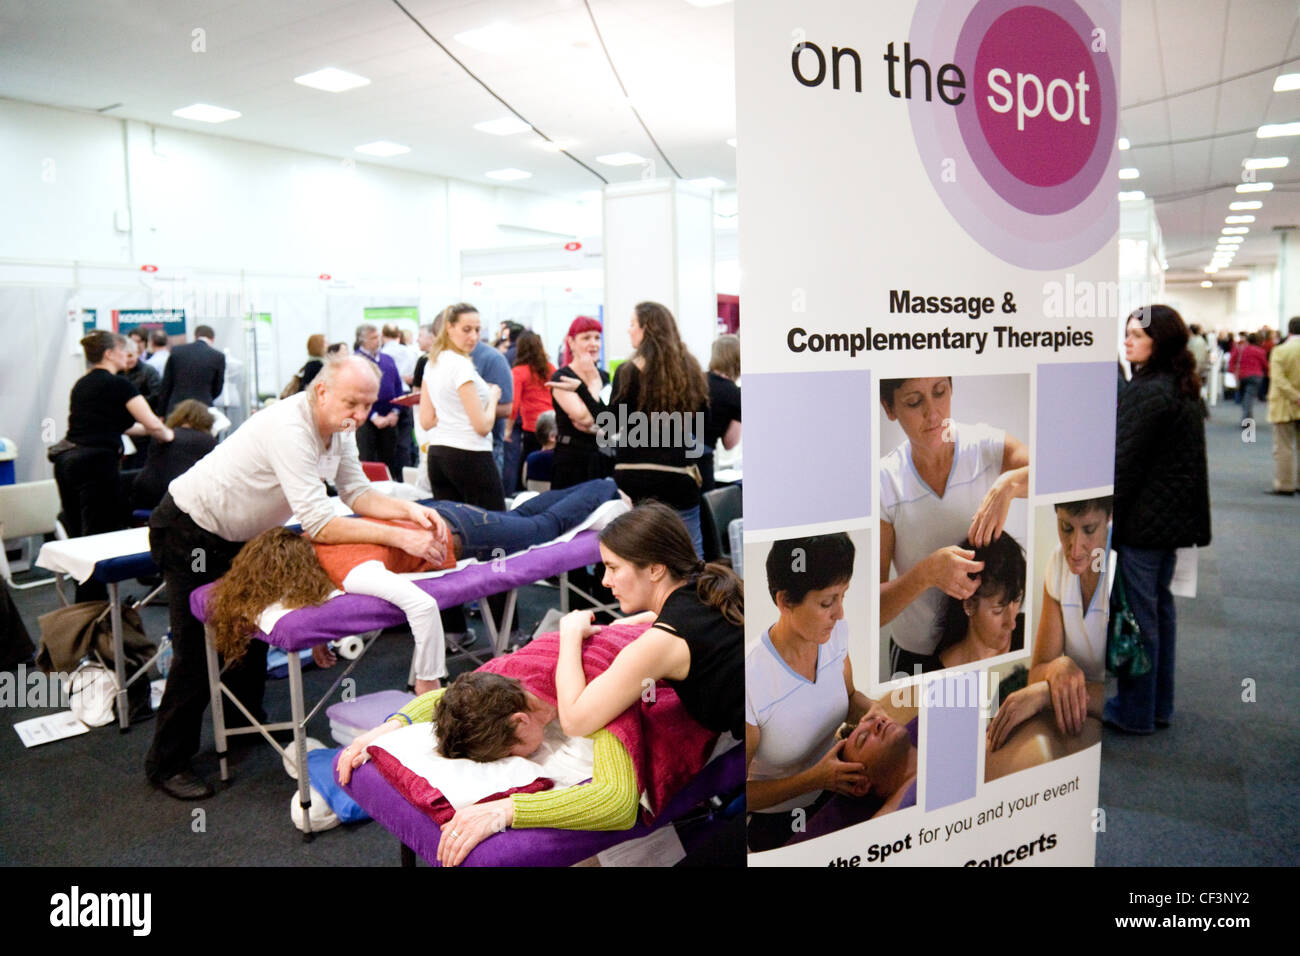 Massage and Complementary medicine therapies for Back Pain, the Back Pain show, London UK Stock Photo